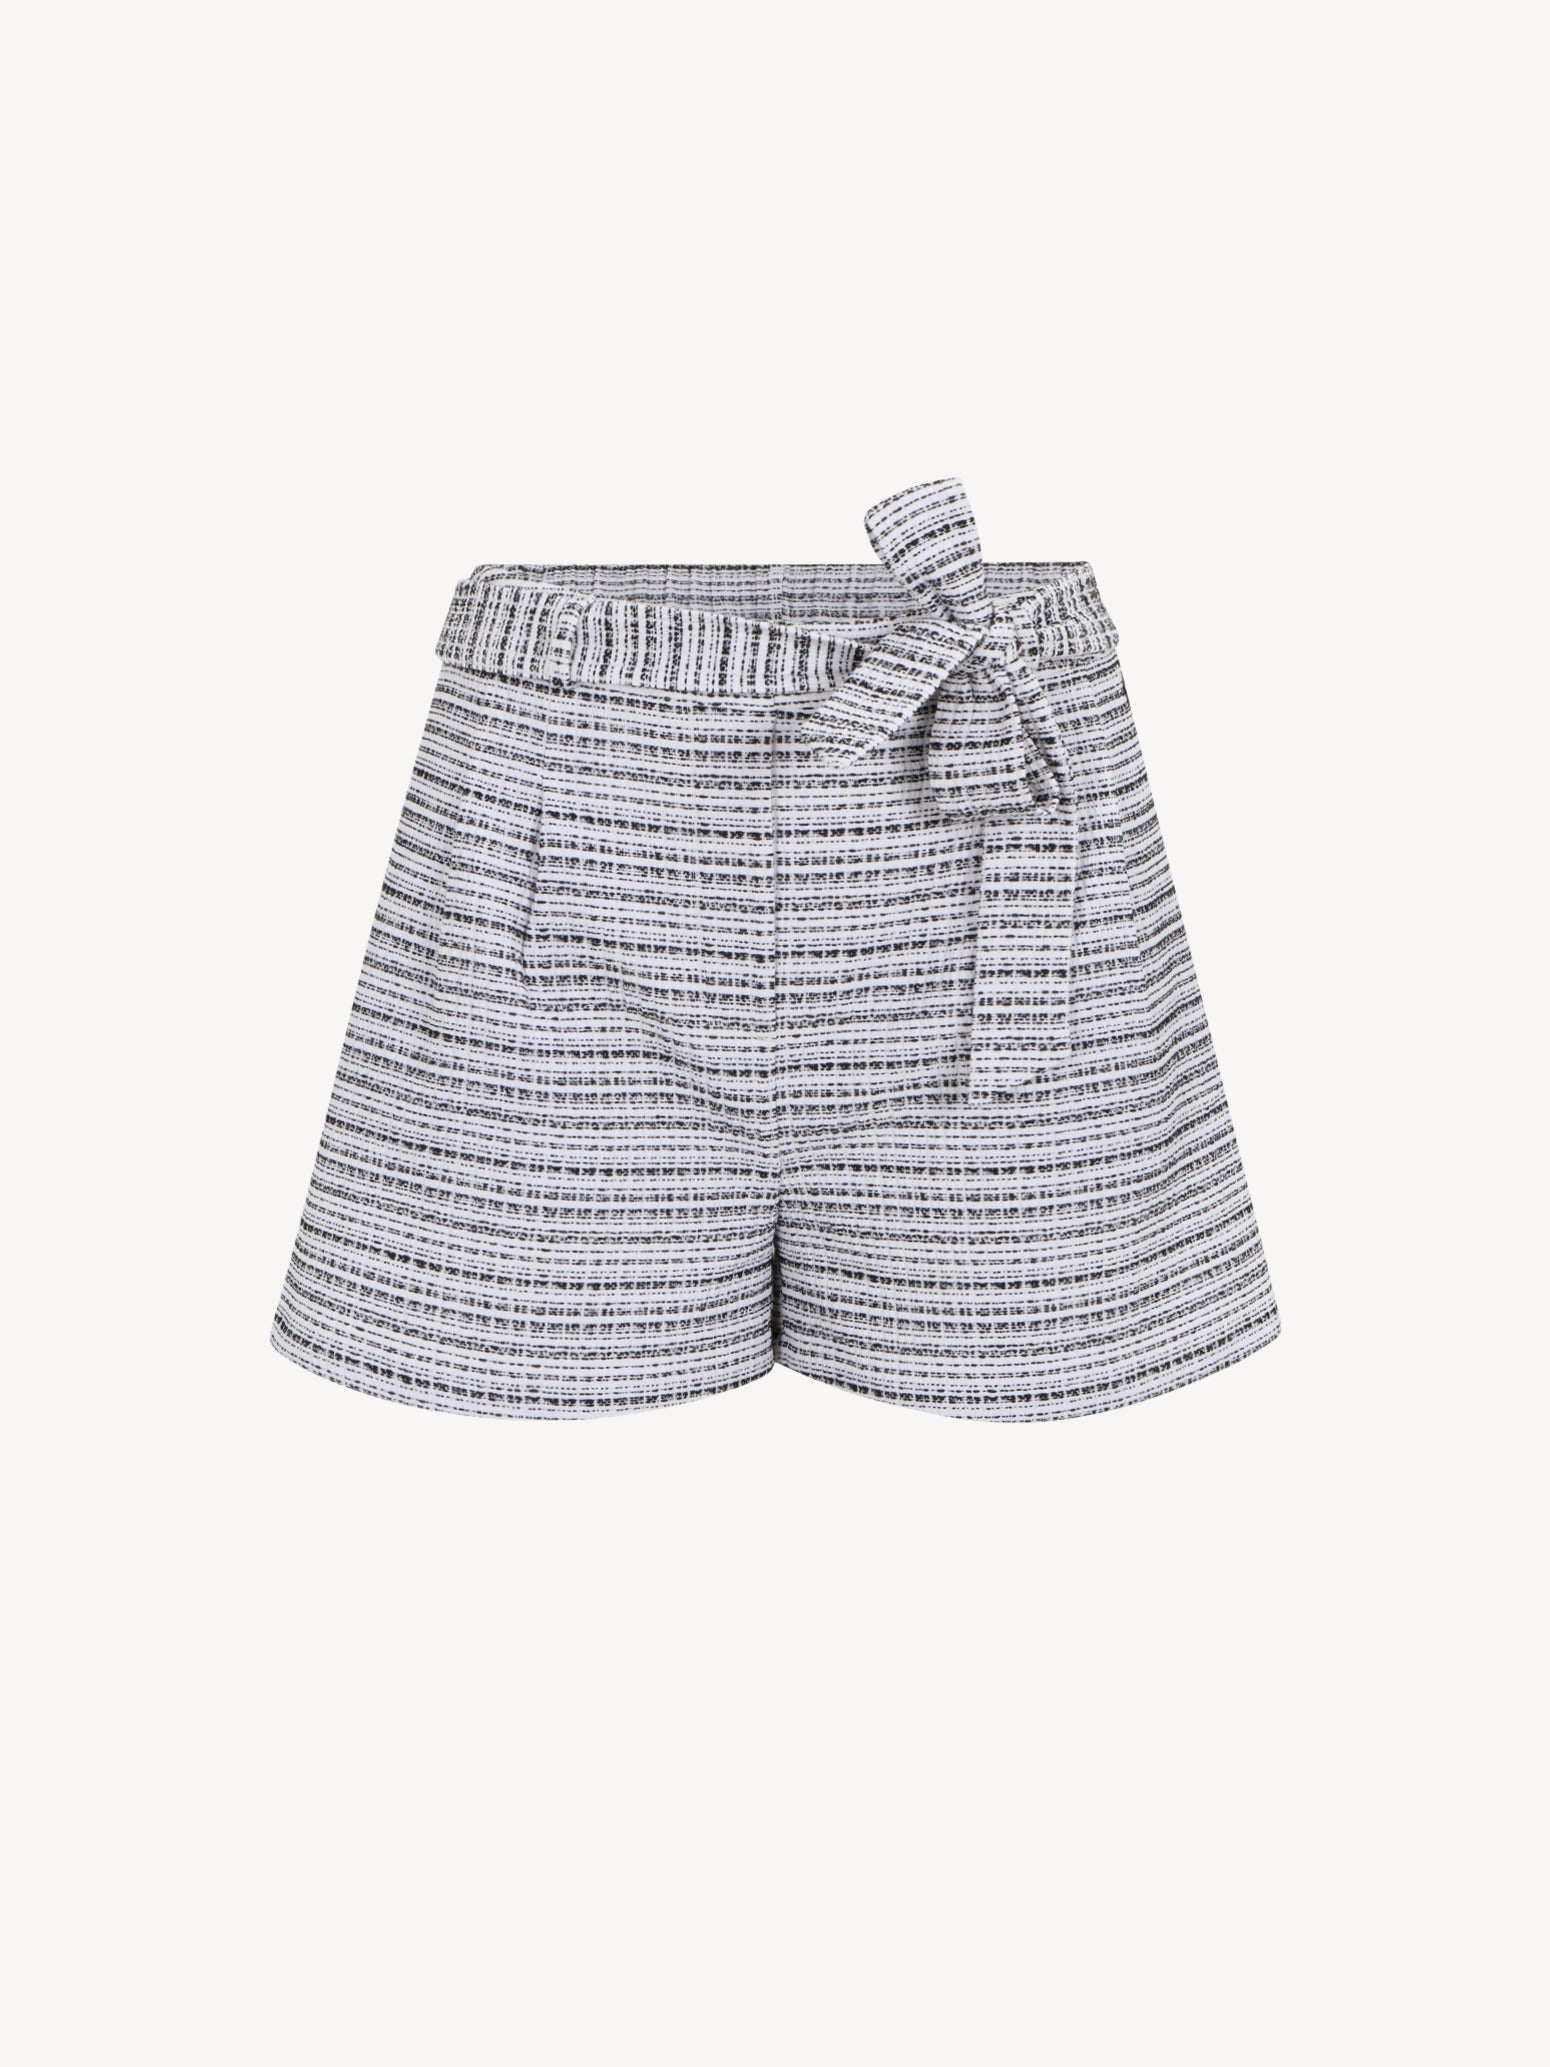 Azare Structure Paperbag Shorts in Off White&Black Shorts Tamaris   